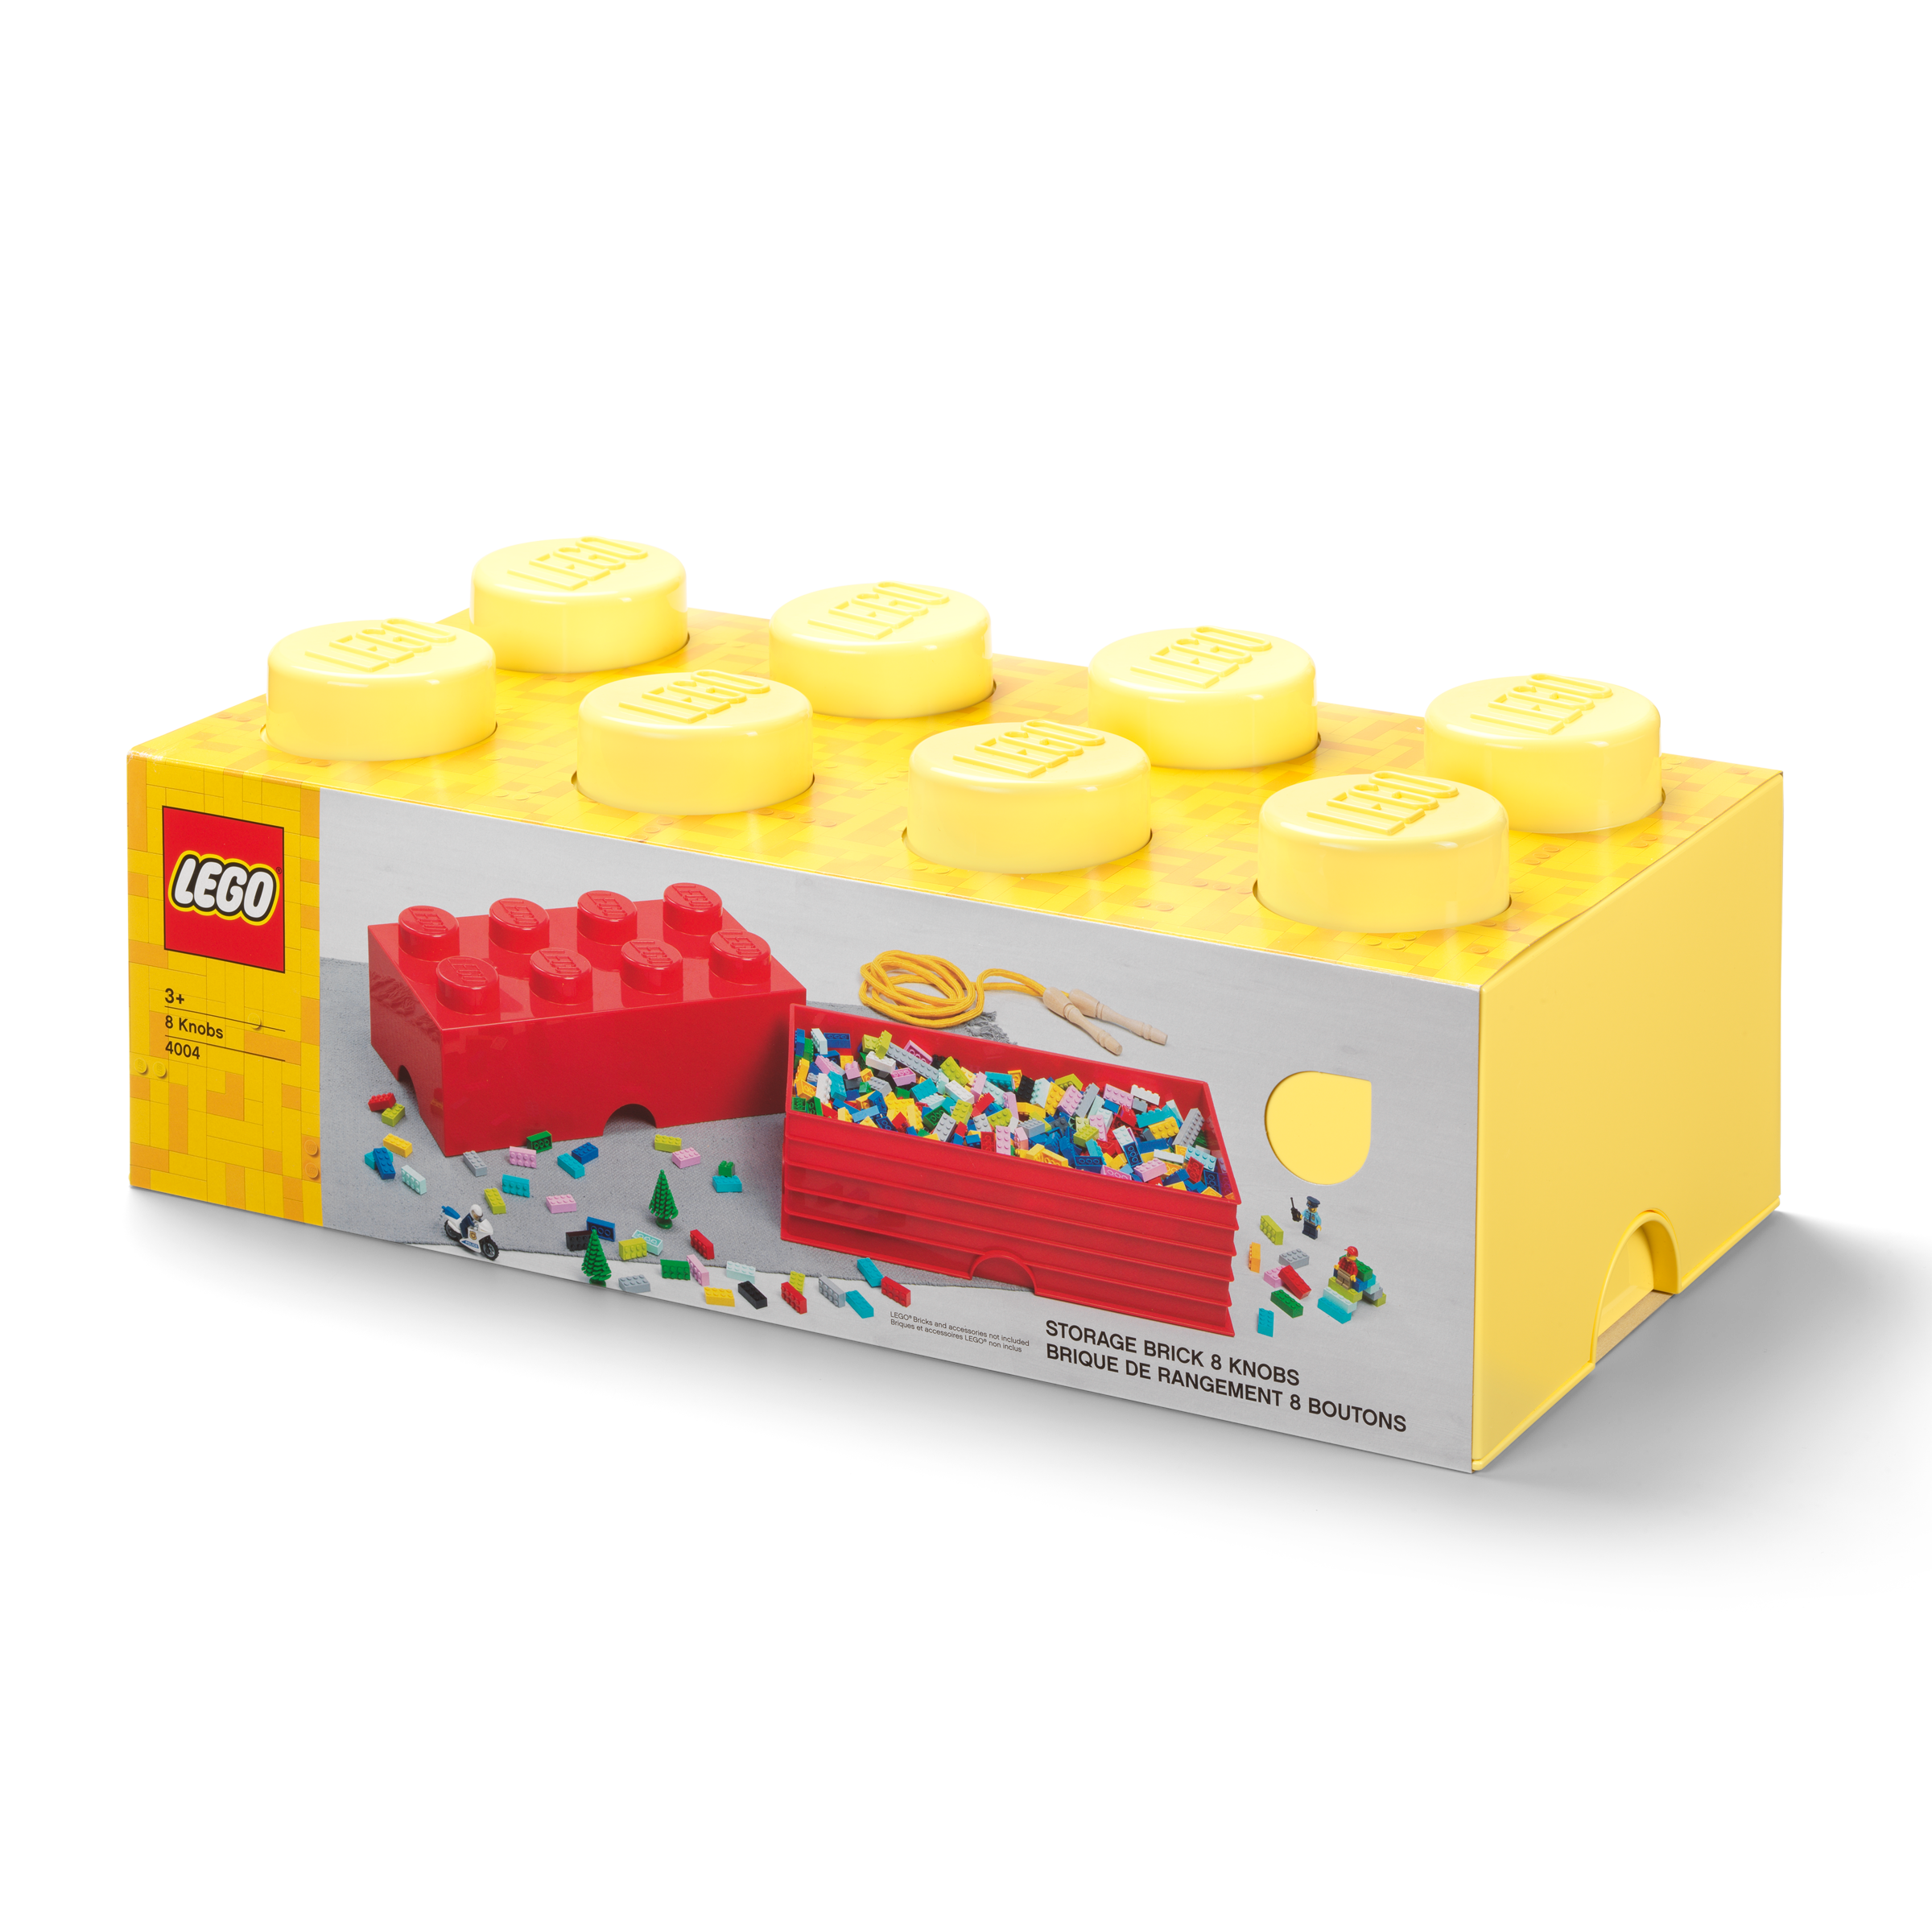 Lego Yellow Brick Storage Box Bin Large Container With Lid And Lego Pieces.